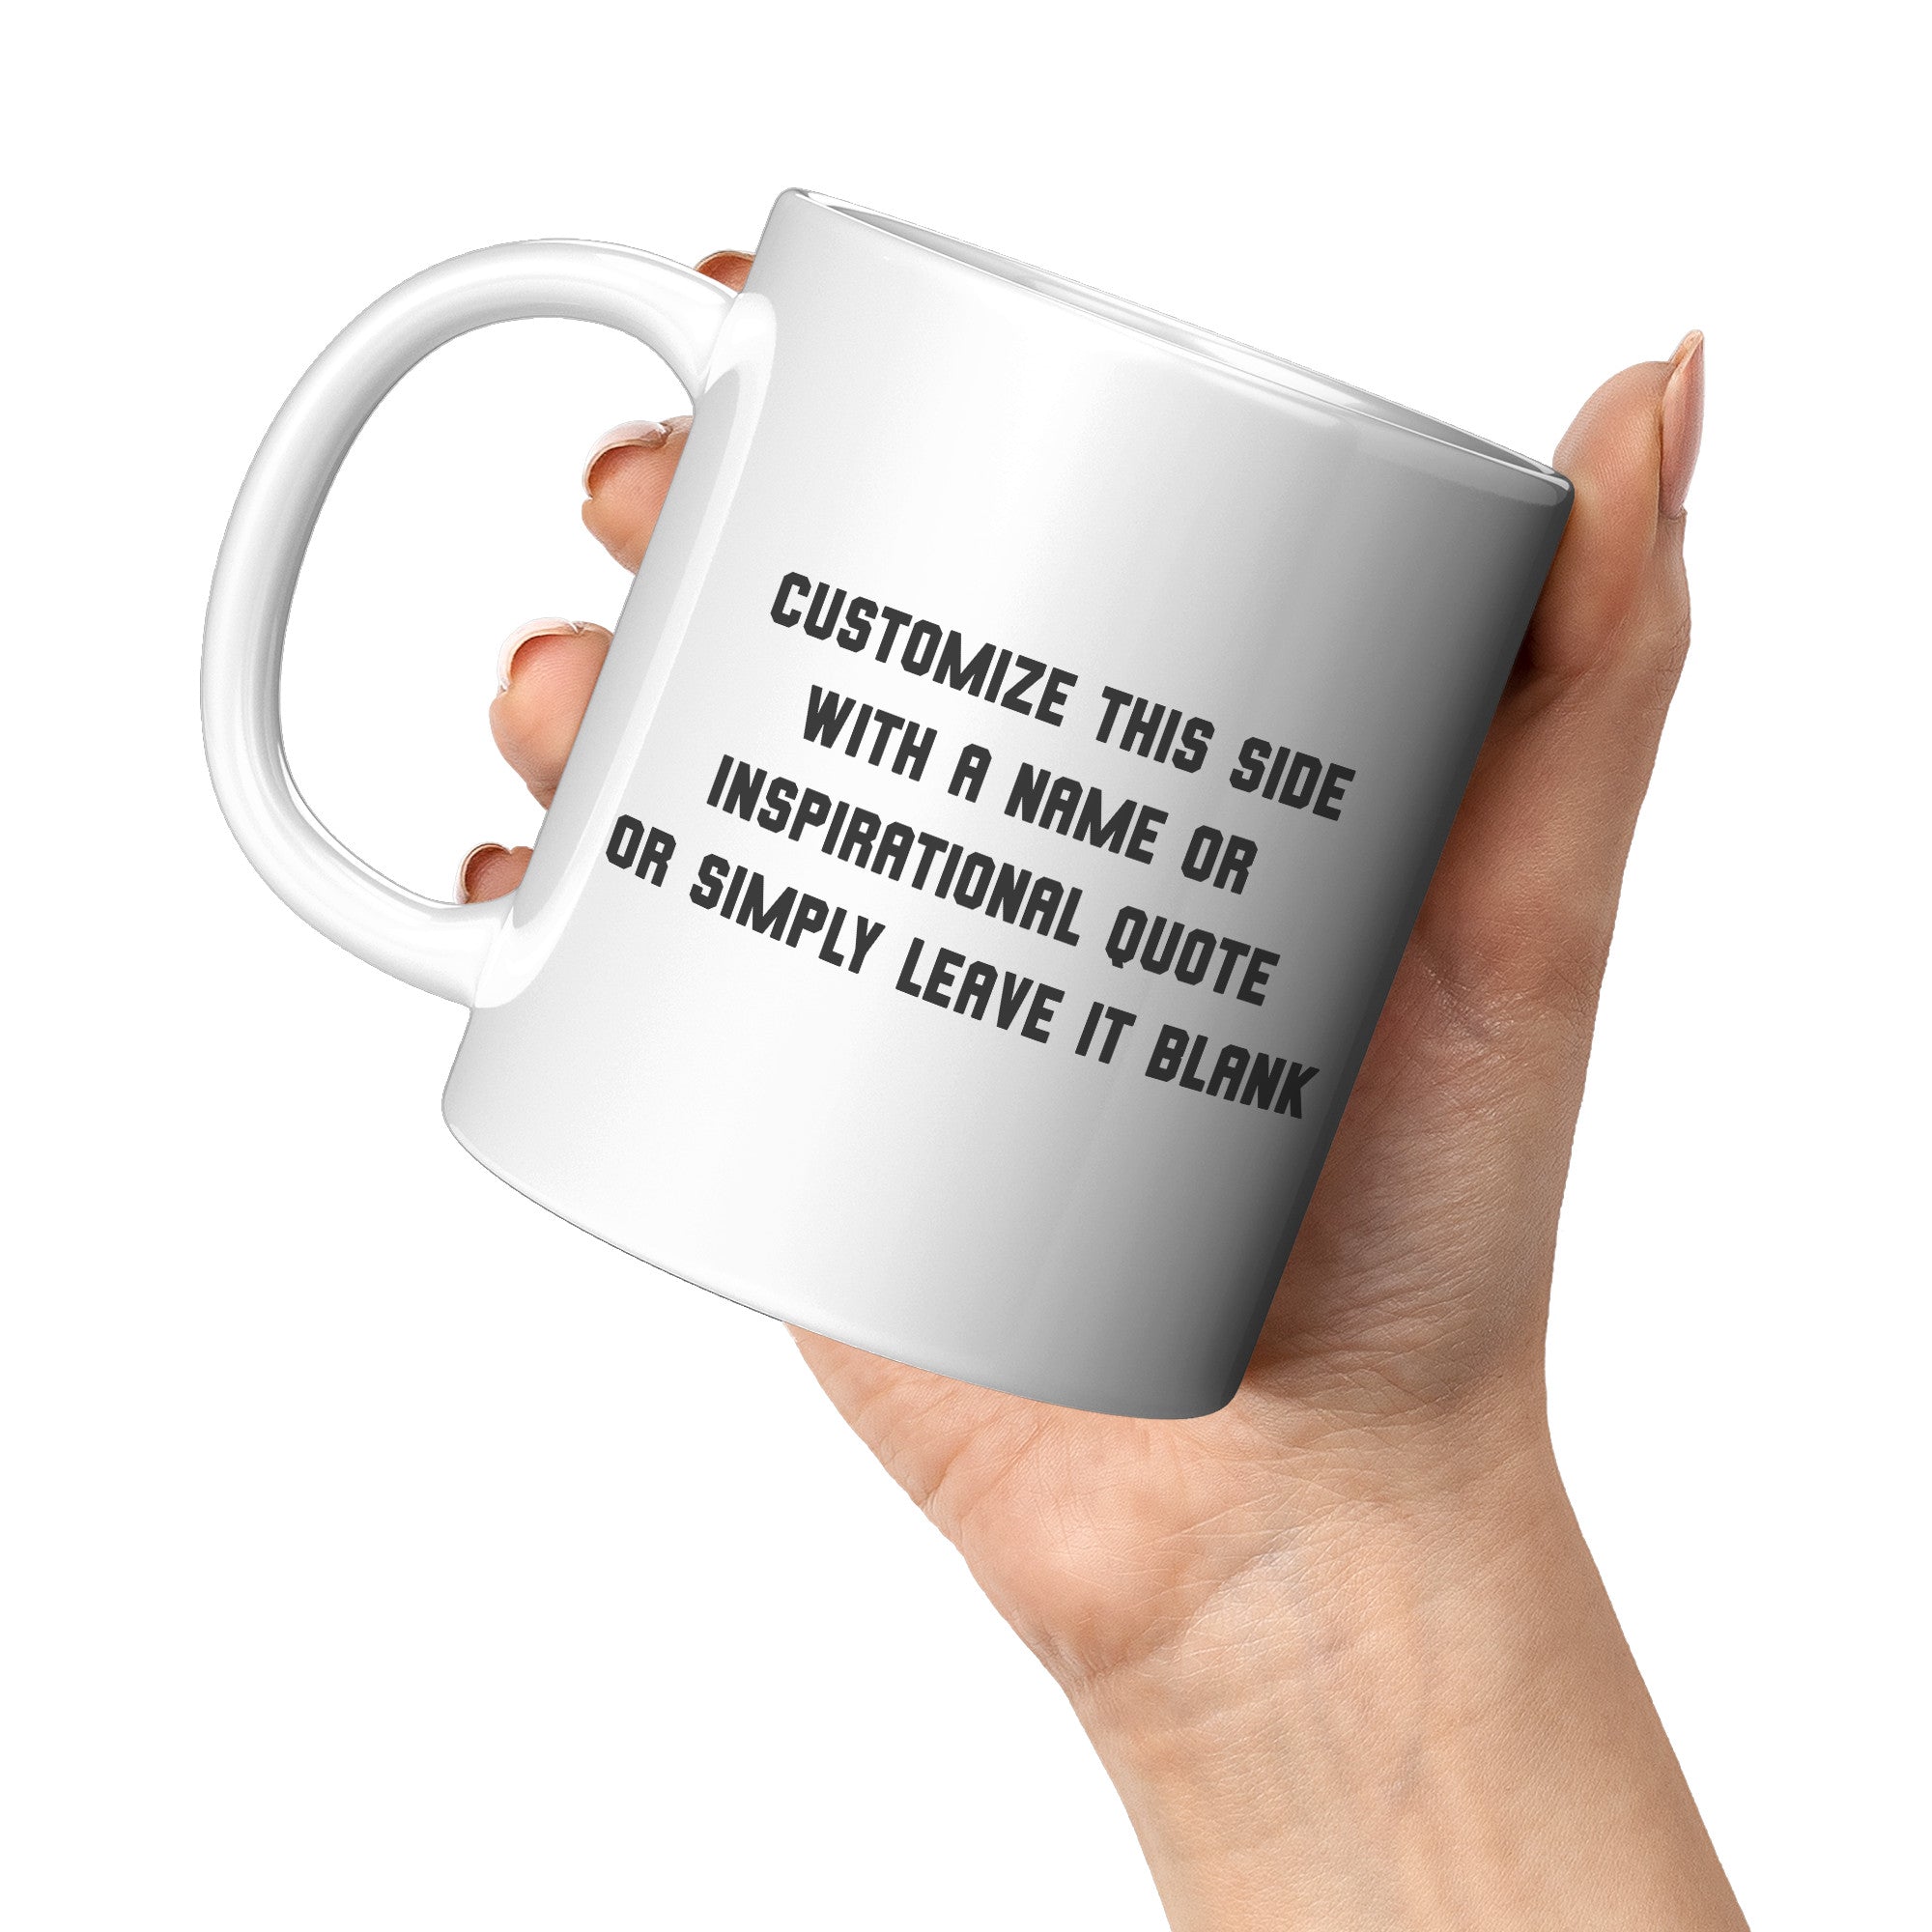 Male Runner Inspirational Mug - Motivational Running Quotes Cup - Perfect Gift for Marathon Men - Runner's Daily Dose of Determination - A